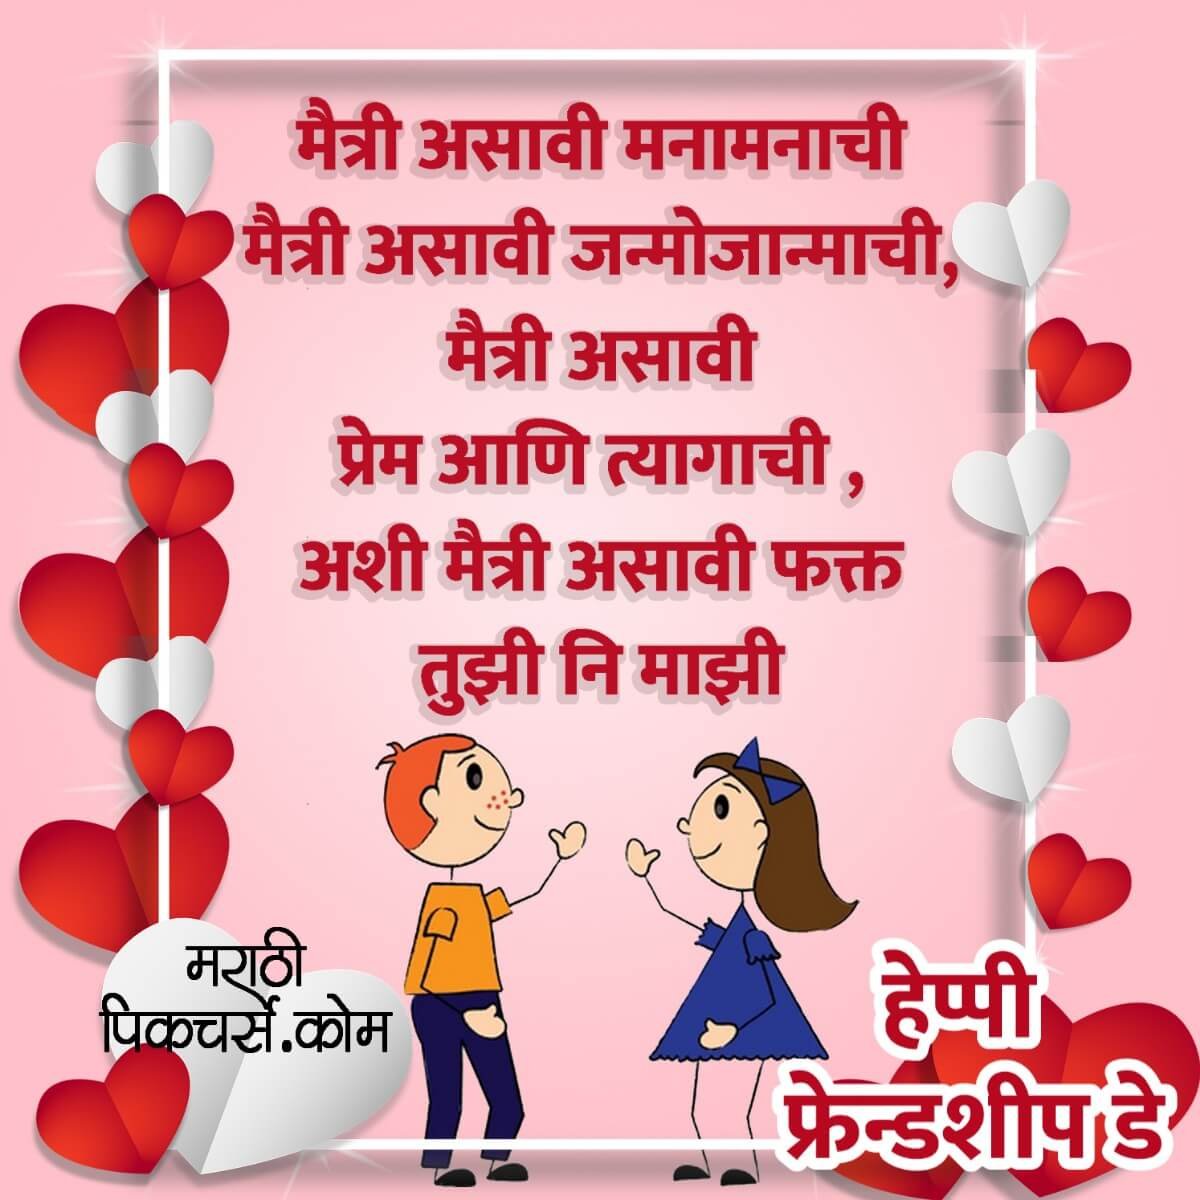 Happy Friendship Day For Friend - MarathiPictures.com